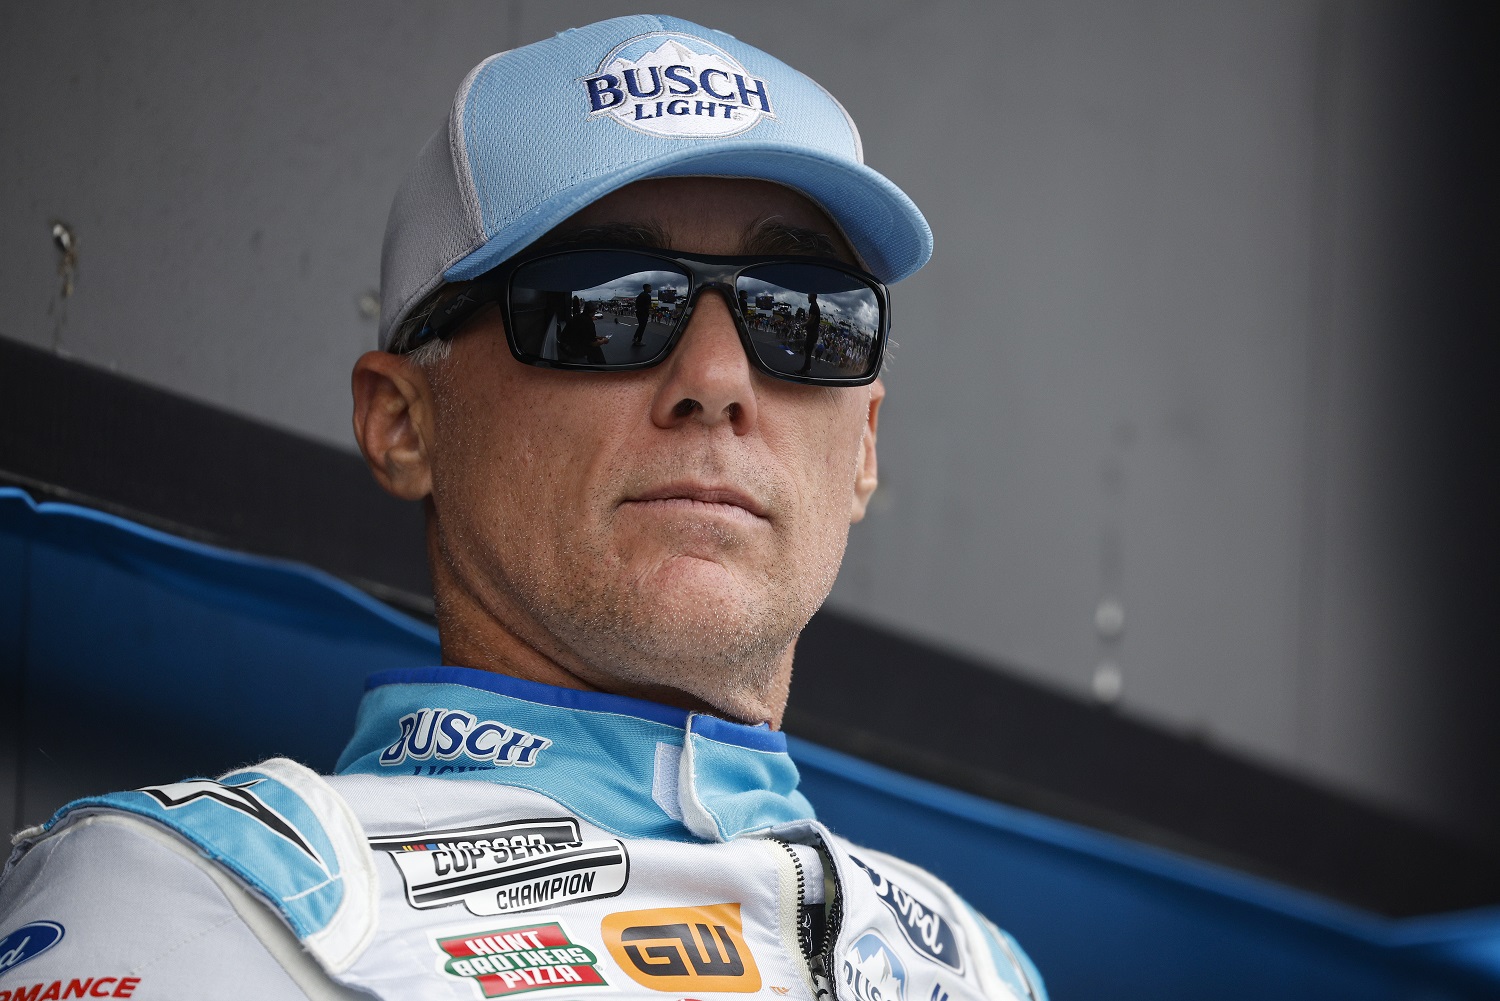 Kevin Harvick waits backstage during ceremonies prior to the NASCAR Cup Series Go Bowling at The Glen at Watkins Glen International on Aug. 21, 2022. | Chris Graythen/Getty Images